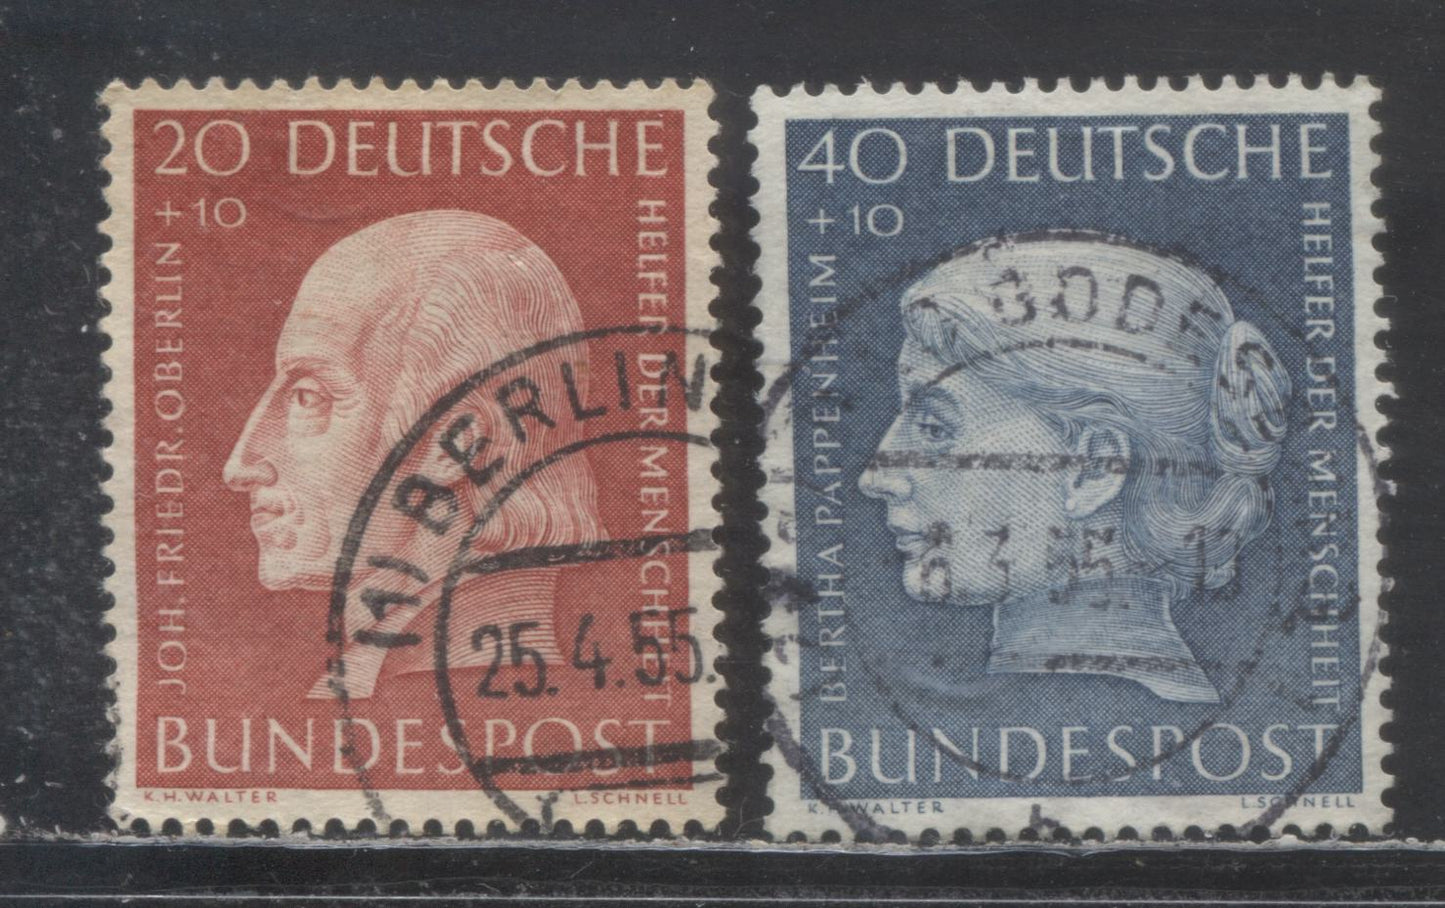 Lot 34 Germany SC#B340-B341 1954 Portraits Semi Postals, 2 Very Fine Used Singles, Click on Listing to See ALL Pictures, 2022 Scott Cat. $34.5